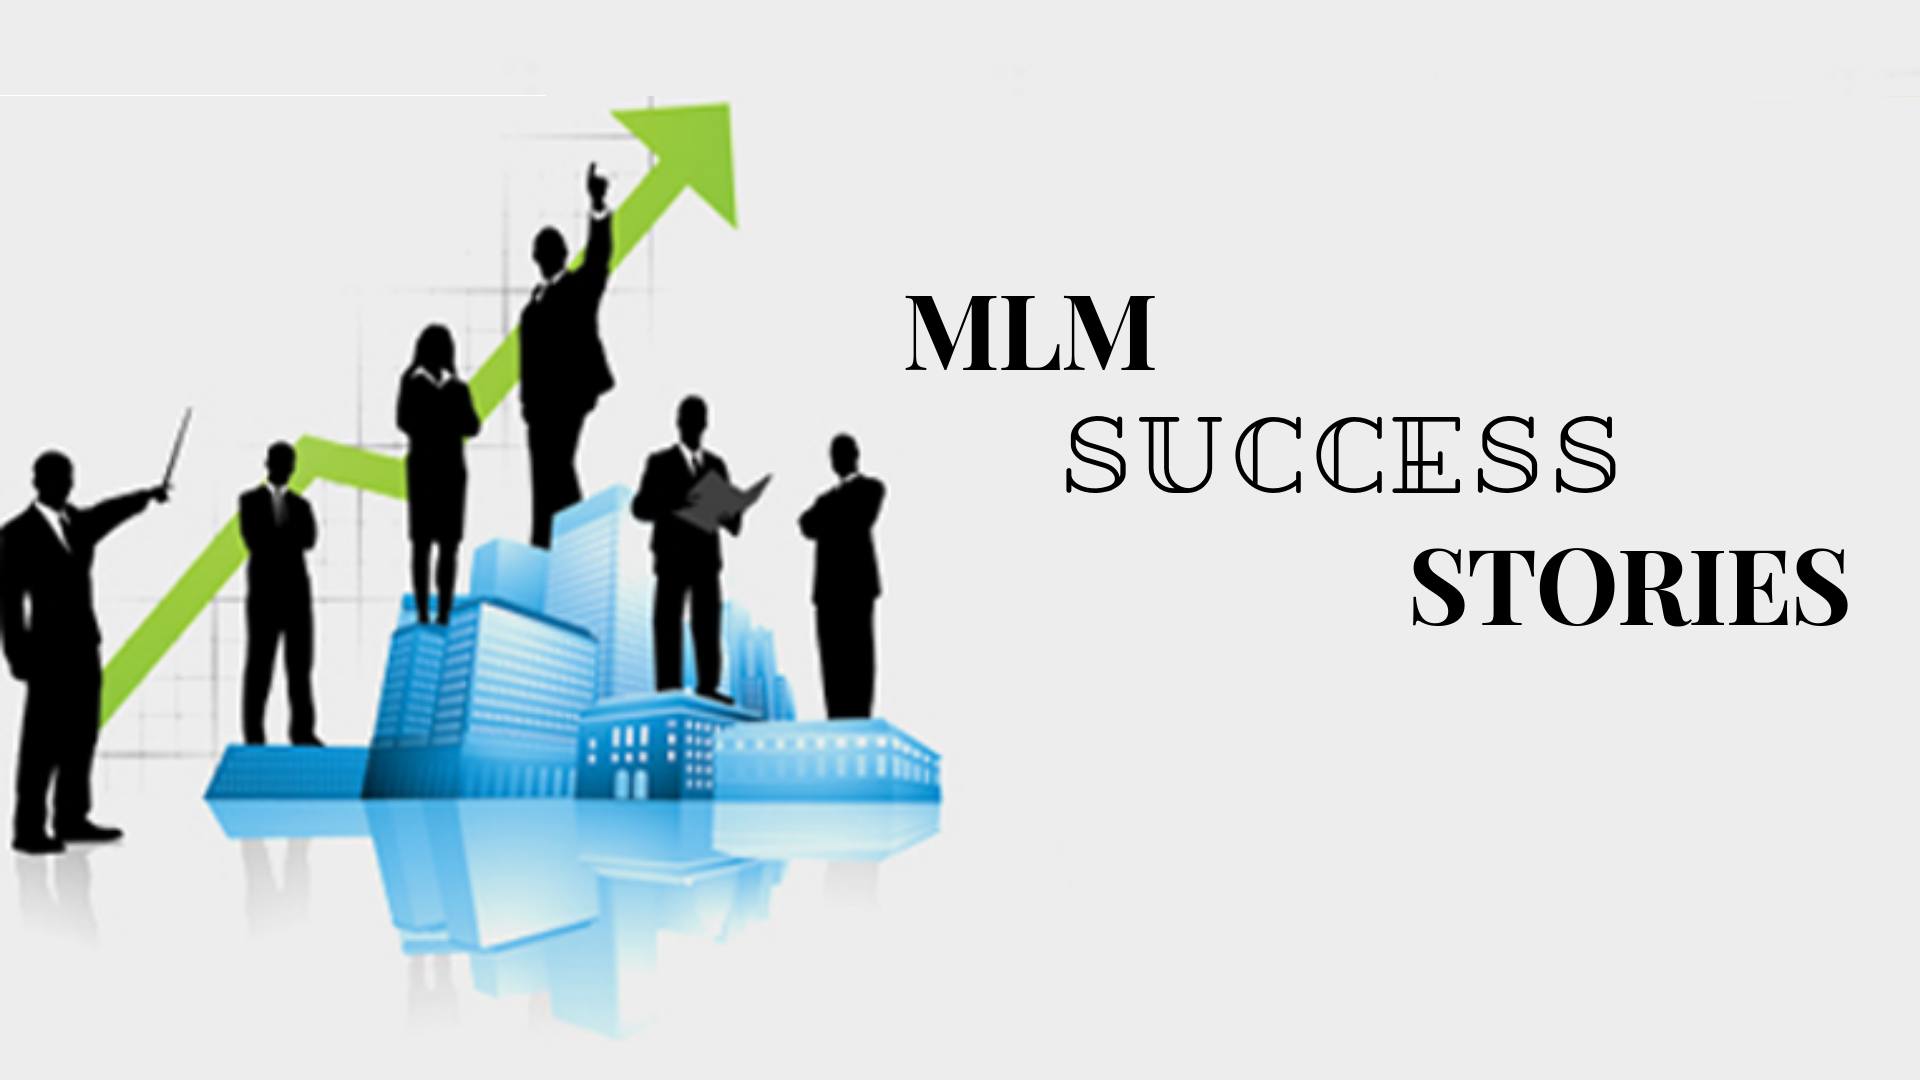 Success Stories and Challenges in MLM Businesses